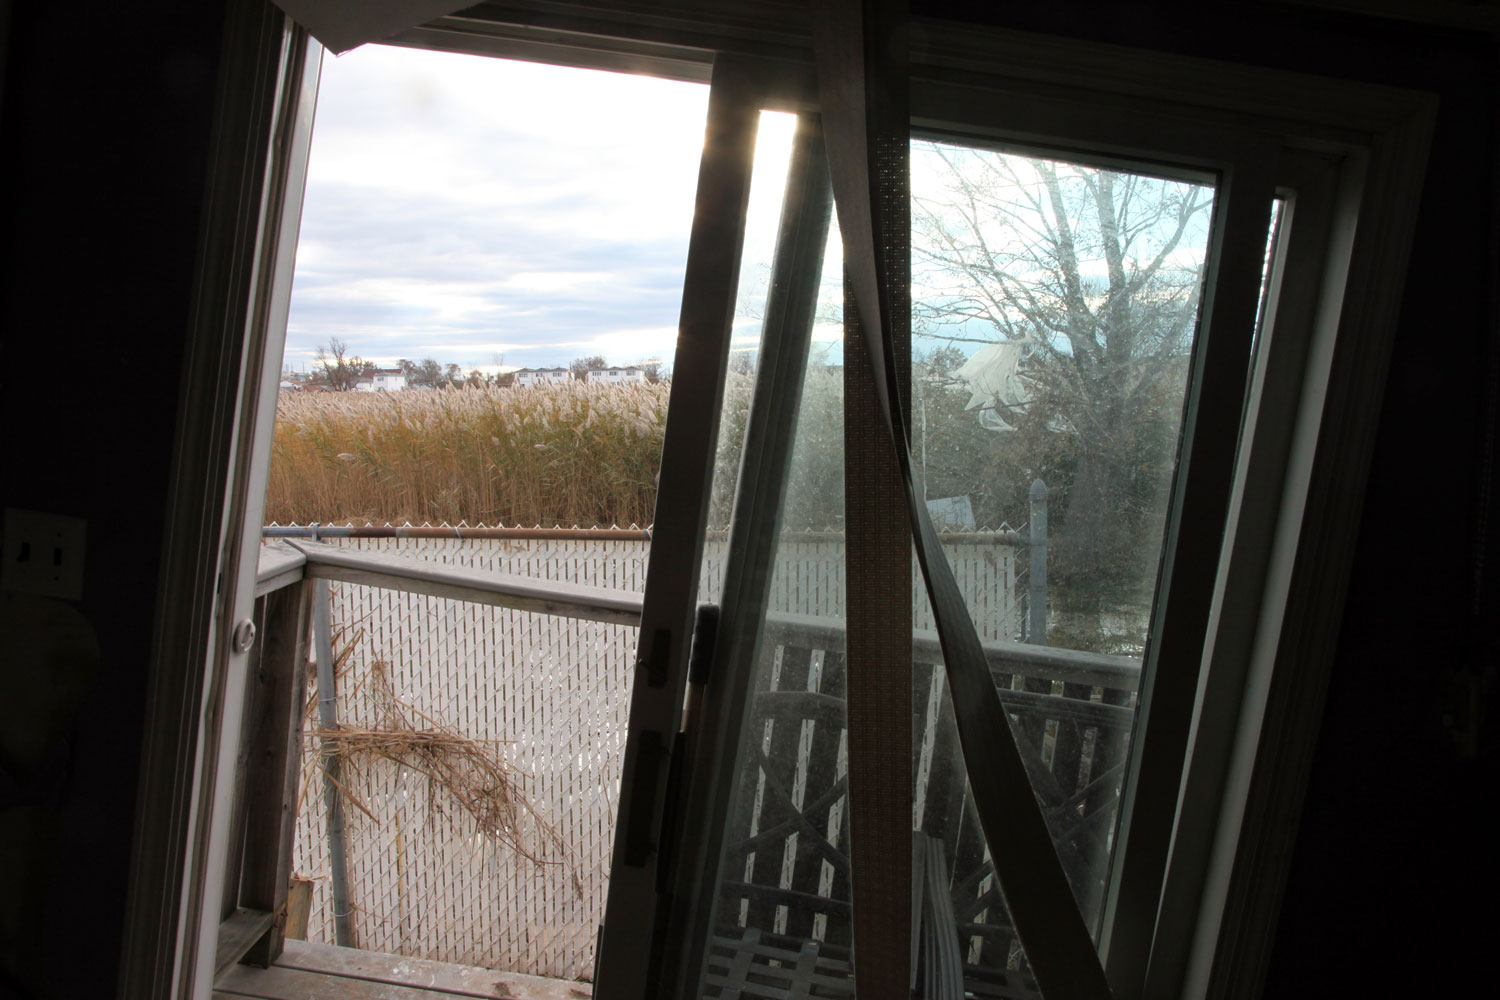 The marsh is visible through the window of Eddie Alvarez's house in Oakwood. The back of the house was lifted from its foundation and thrown sideways by the surge during the storm. Eddie, his wife, two dogs and a bird rode out the storm in the attic until they were rescued in the early morning by six firefighters.